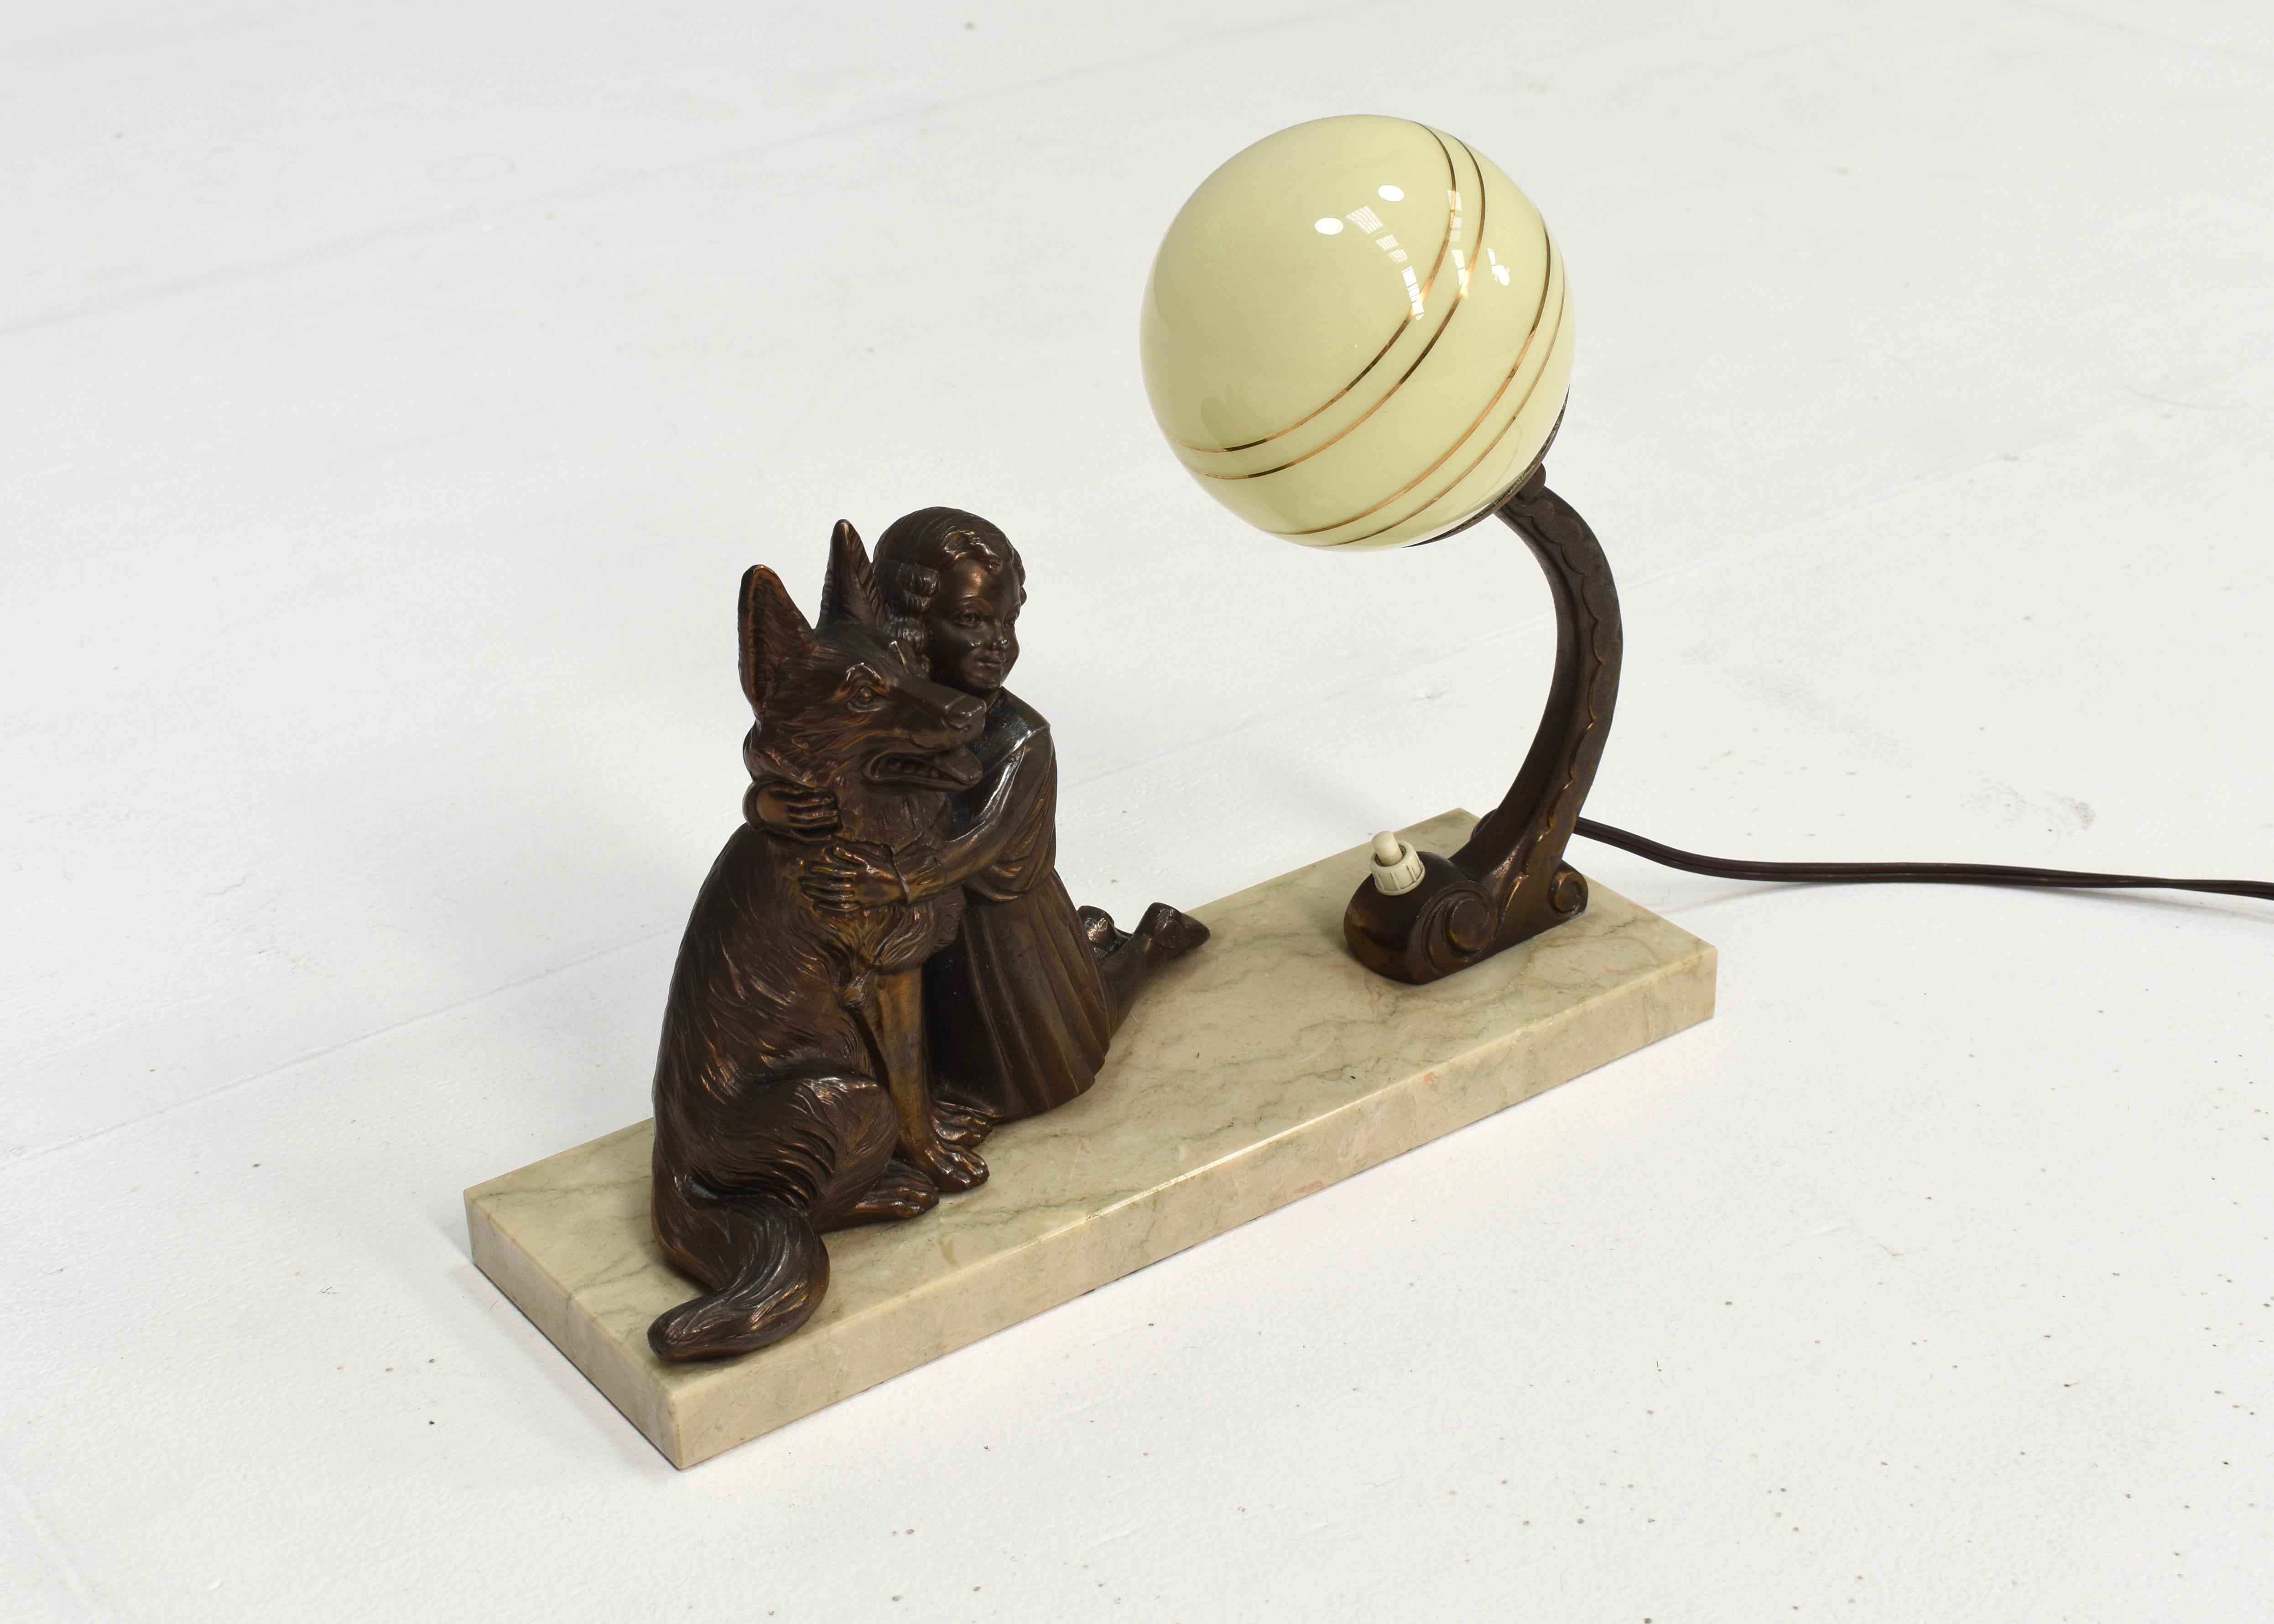 French Art Deco Desk Table Lamp Girl and German Shepherd Sculpture, circa 1930 In Good Condition For Sale In Pijnacker, Zuid-Holland